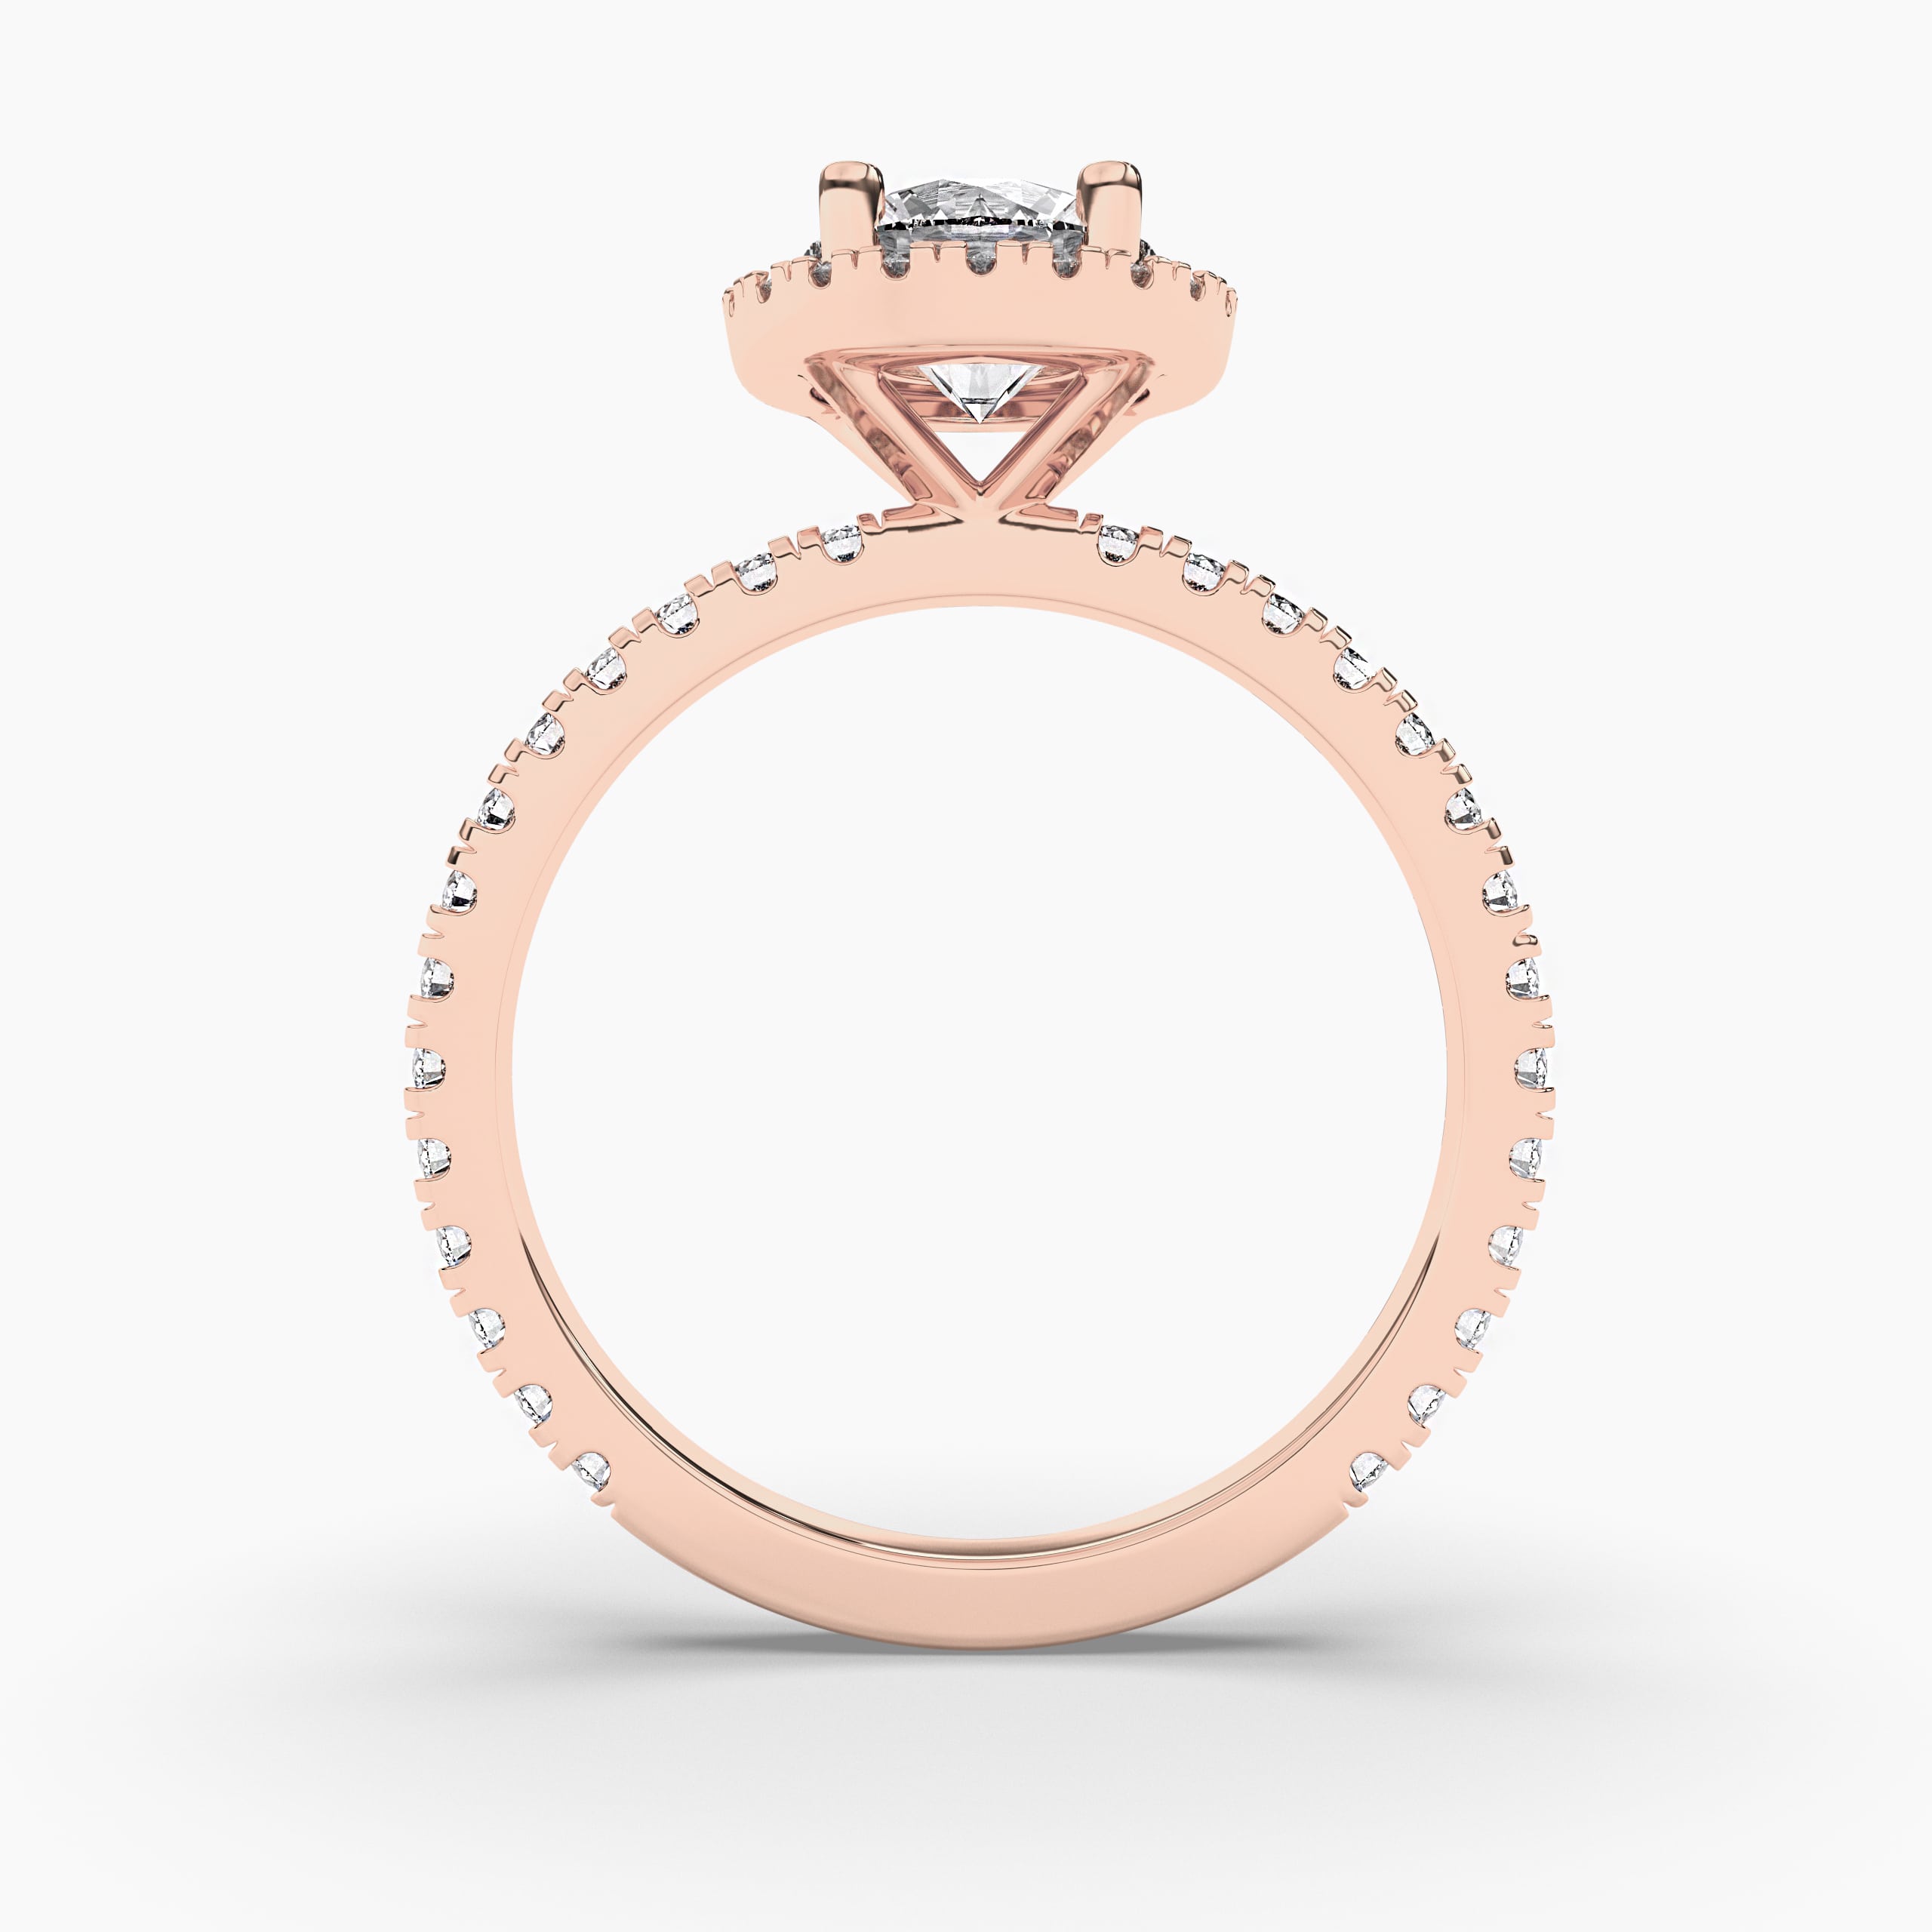 FLORAL HALO ROUND DIAMOND ENGAGEMENT RING ROSE GOLD